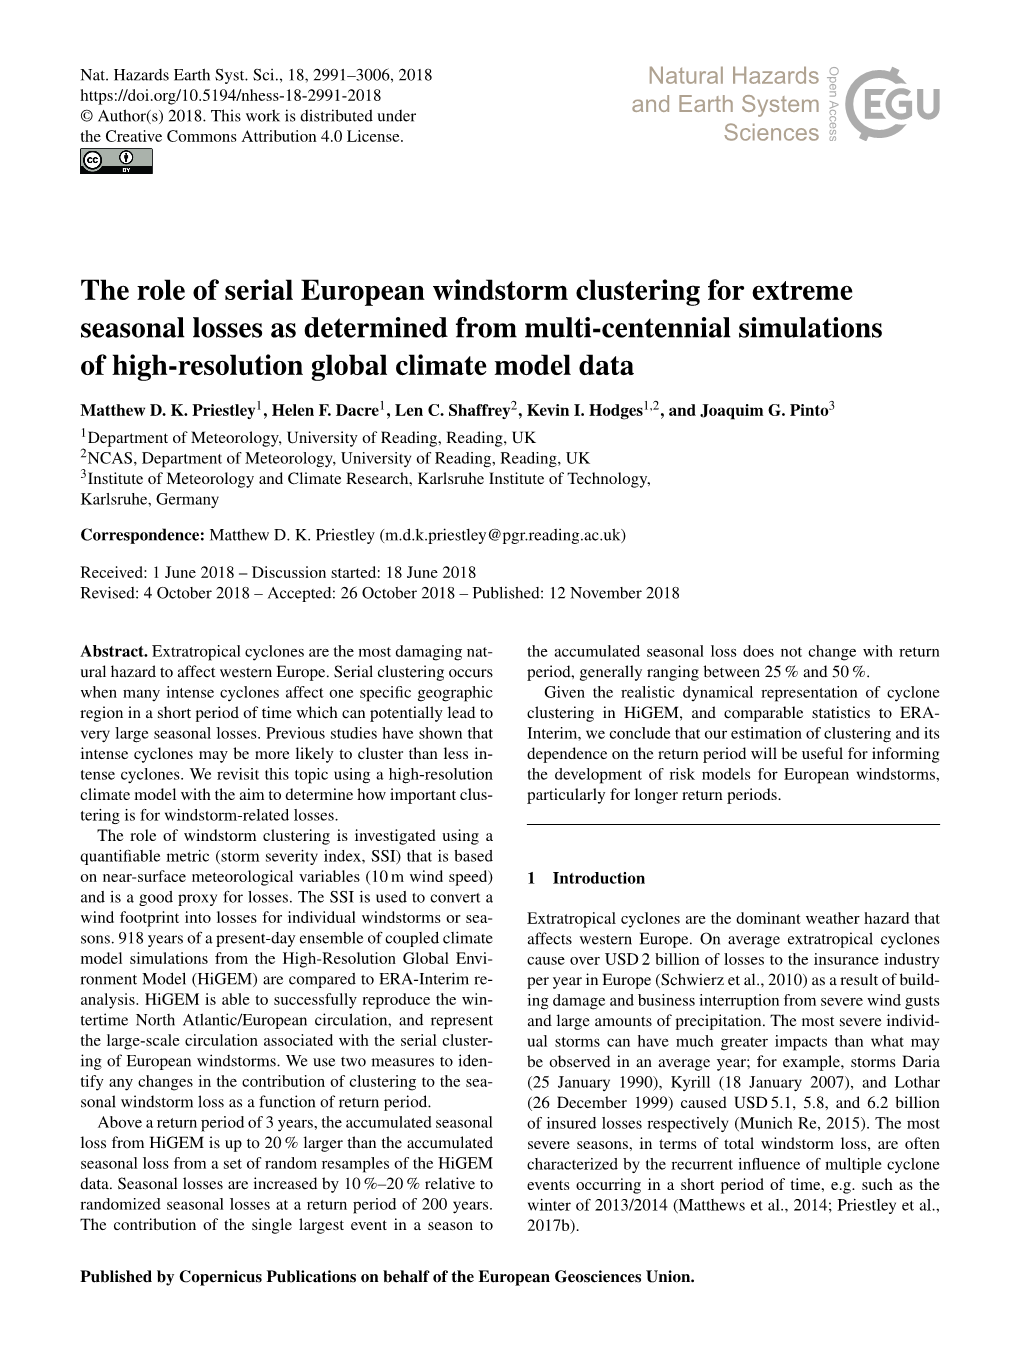 The Role of Serial European Windstorm Clustering for Extreme Seasonal